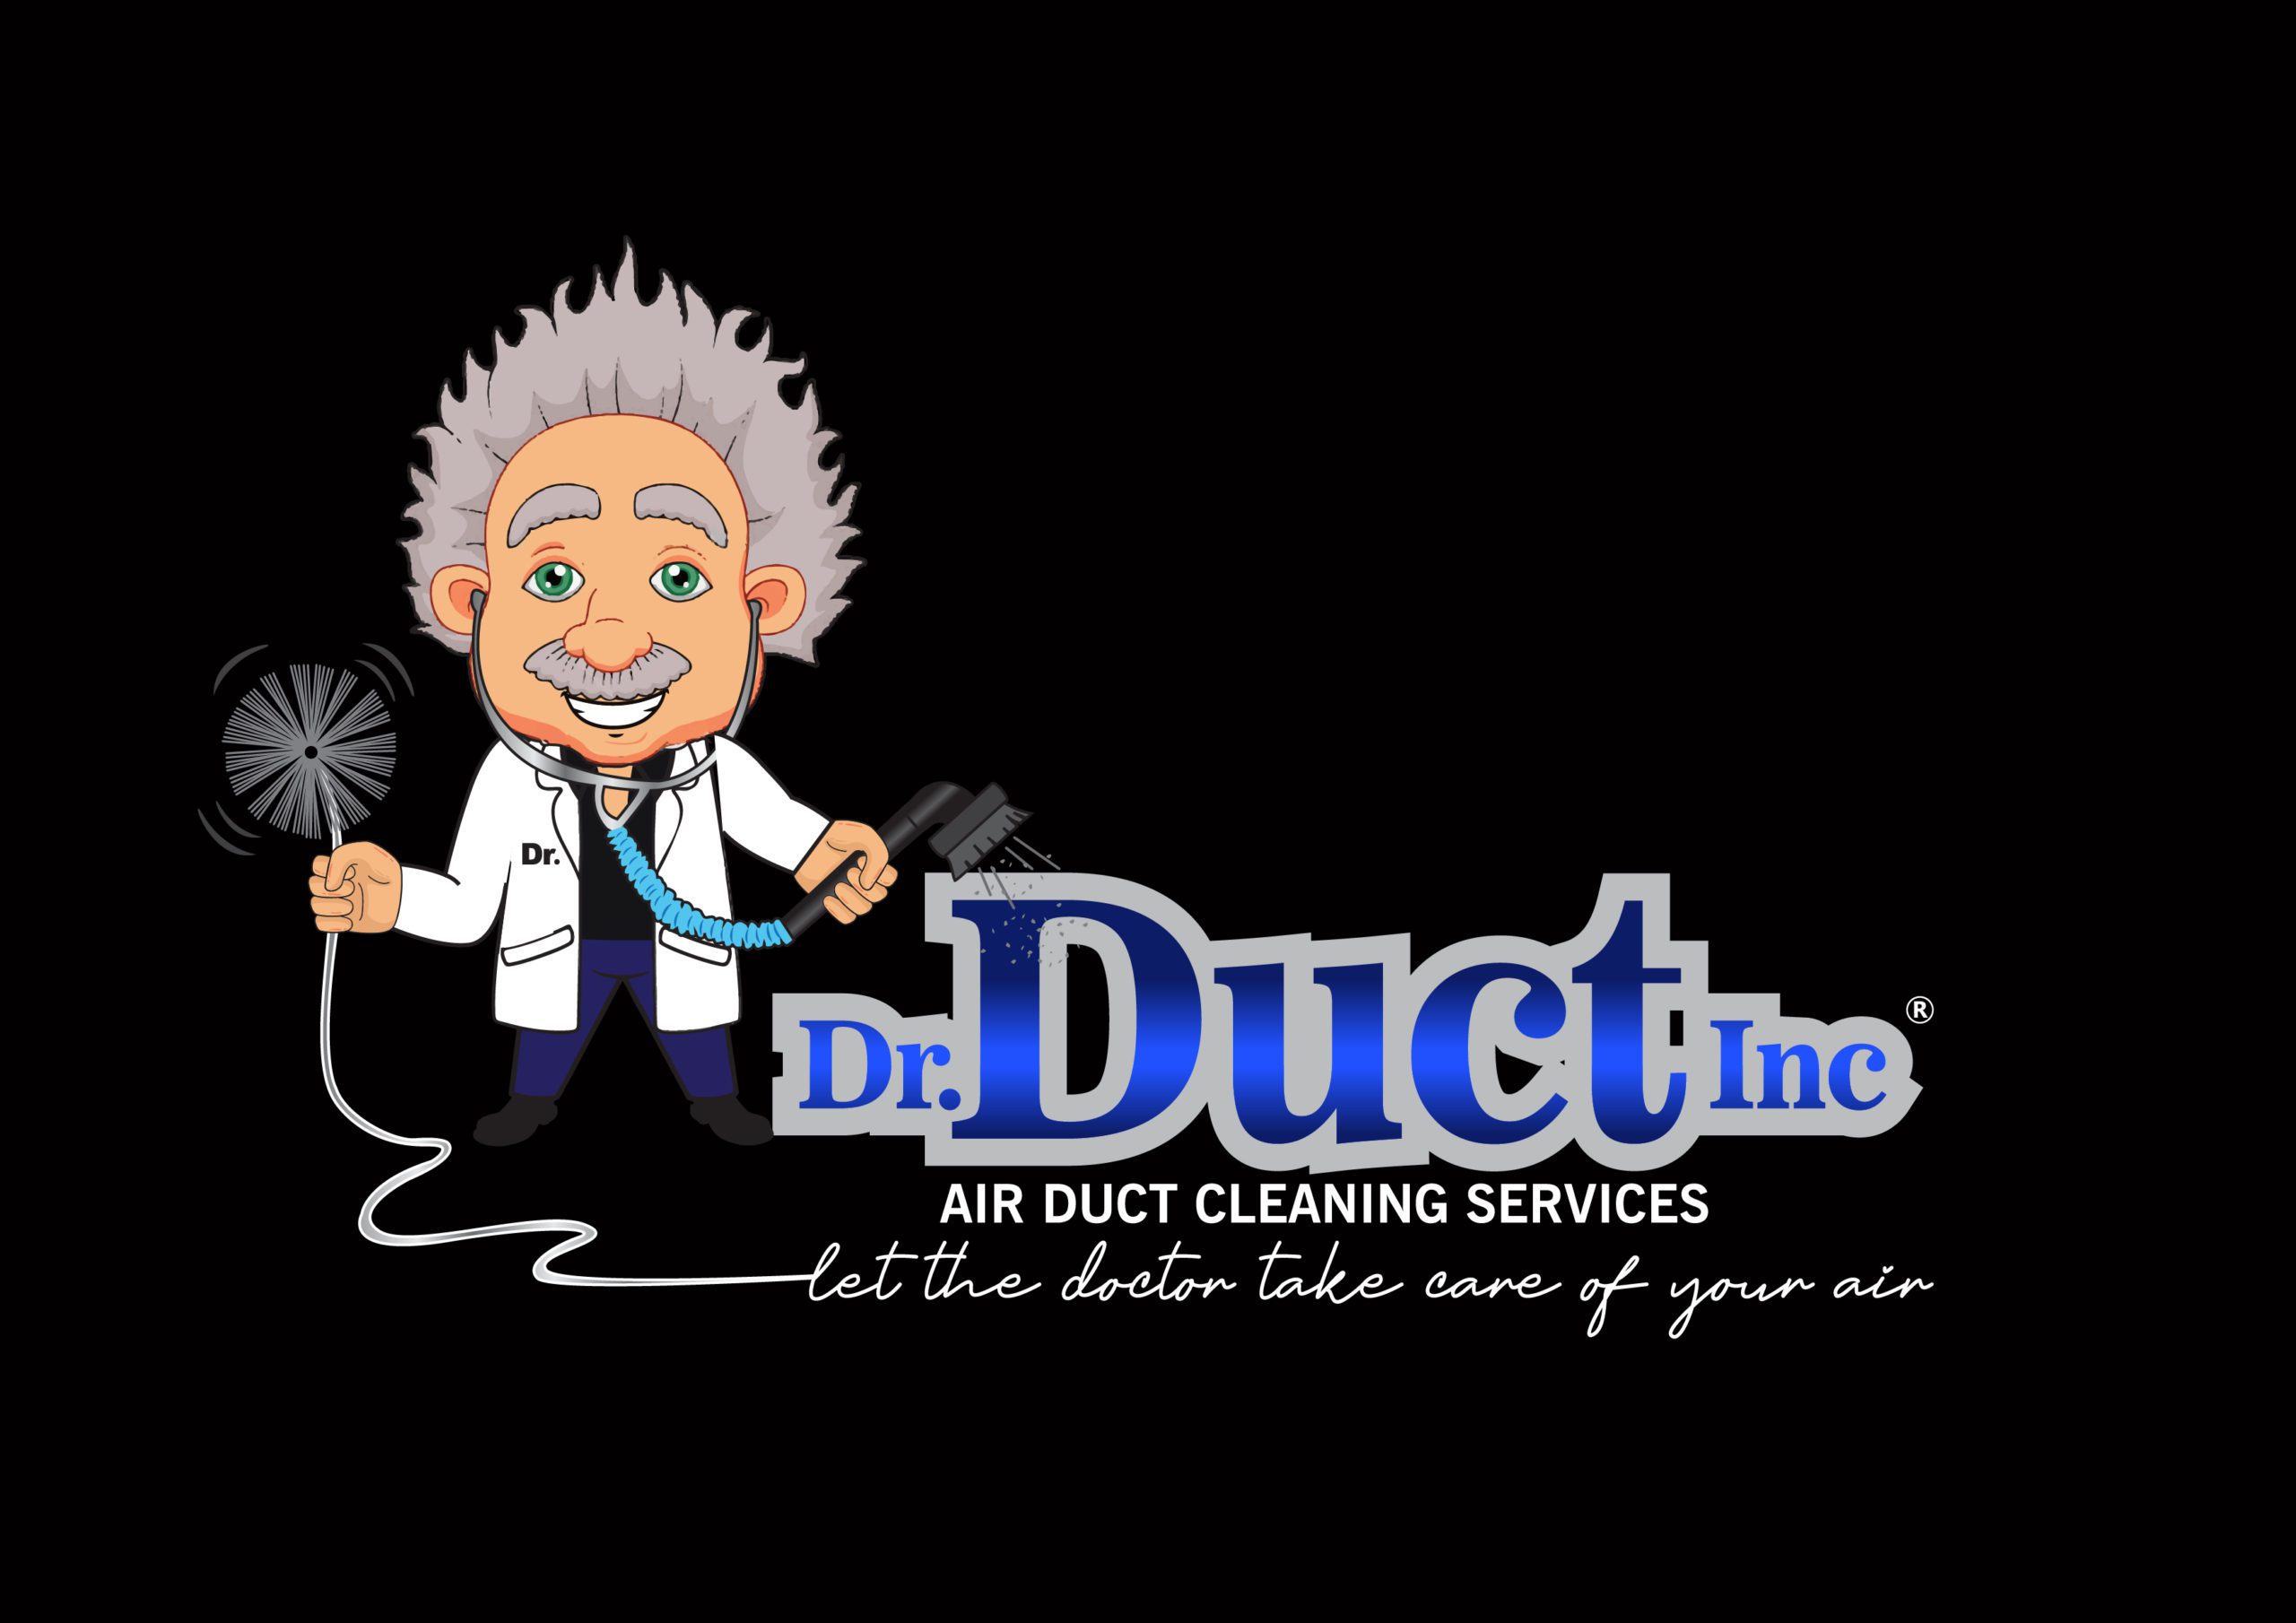 Dr Duct Air Duct Cleaning Services 1 Air Duct In Dmv Area